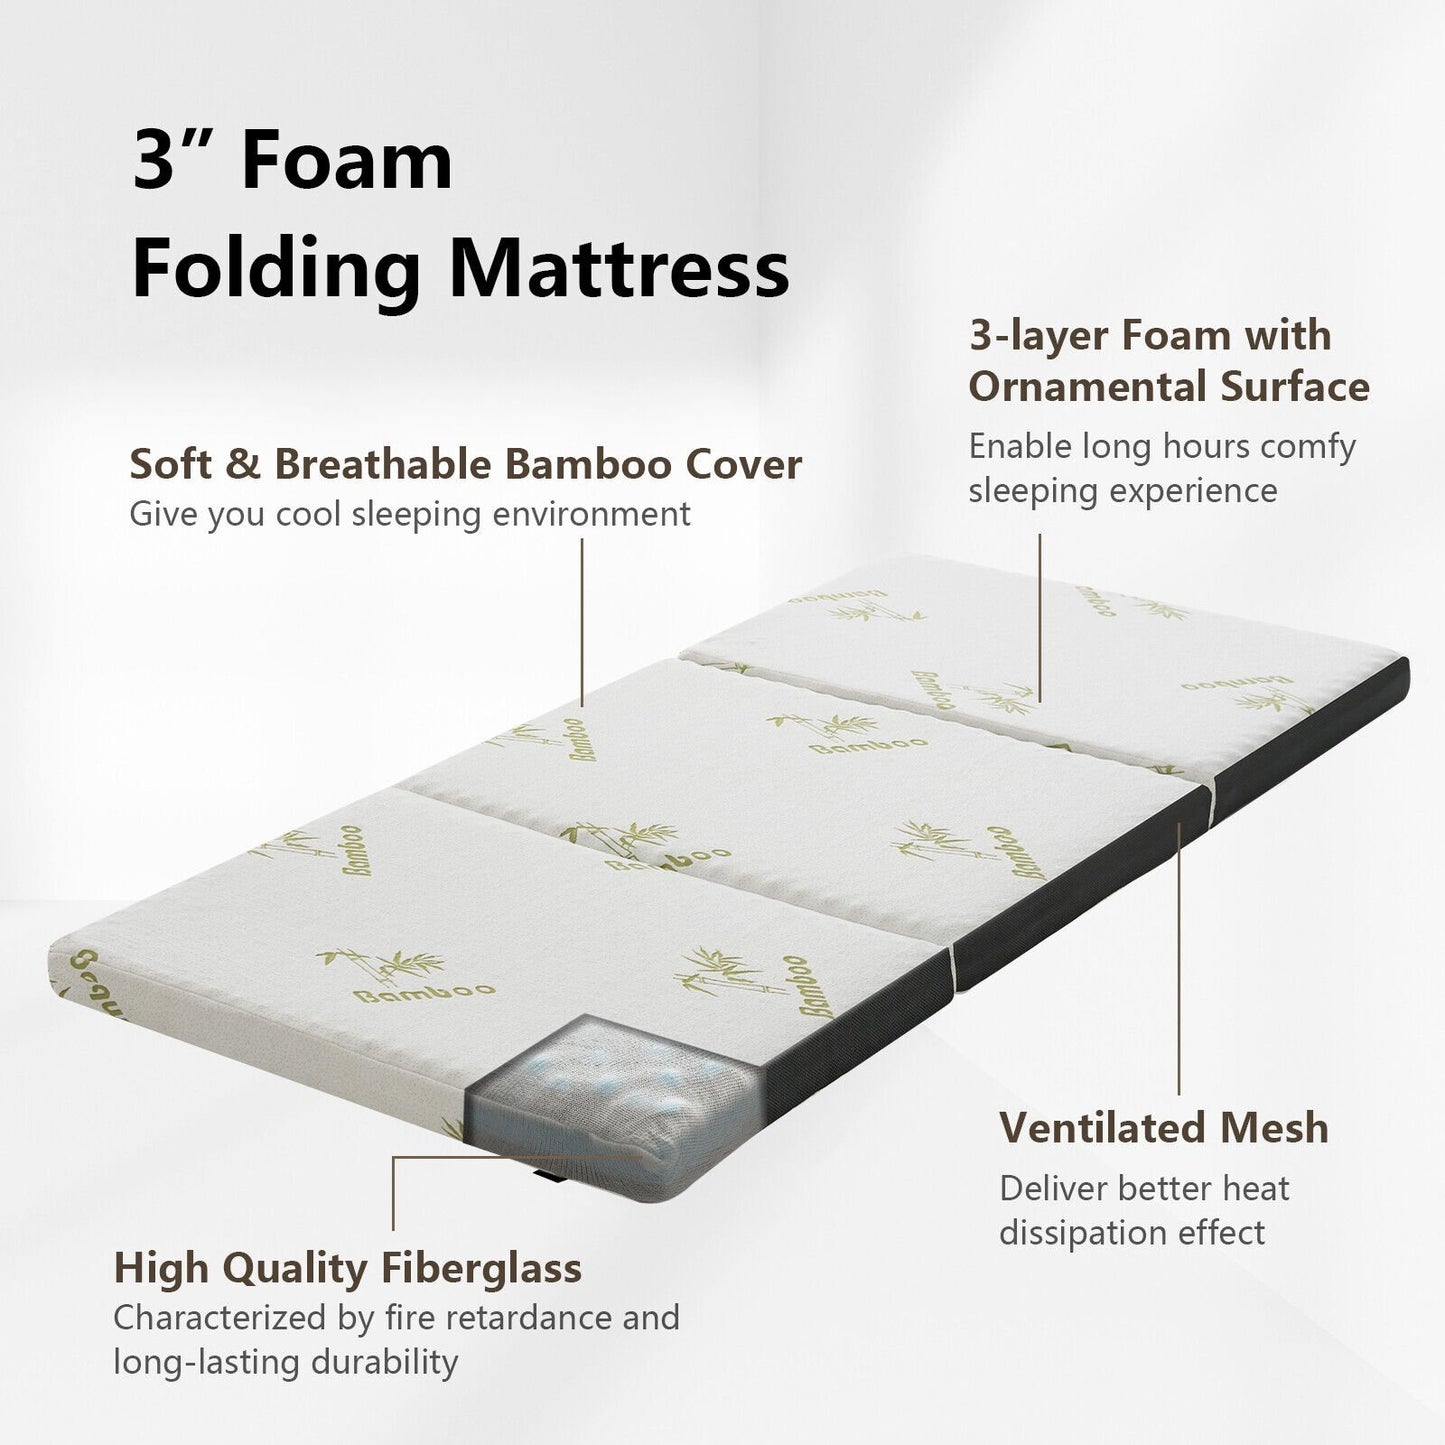 Queen 3 Inch Tri-fold Memory Foam Floor Mattress Topper Portable with Carrying Bag-S, White - Gallery Canada